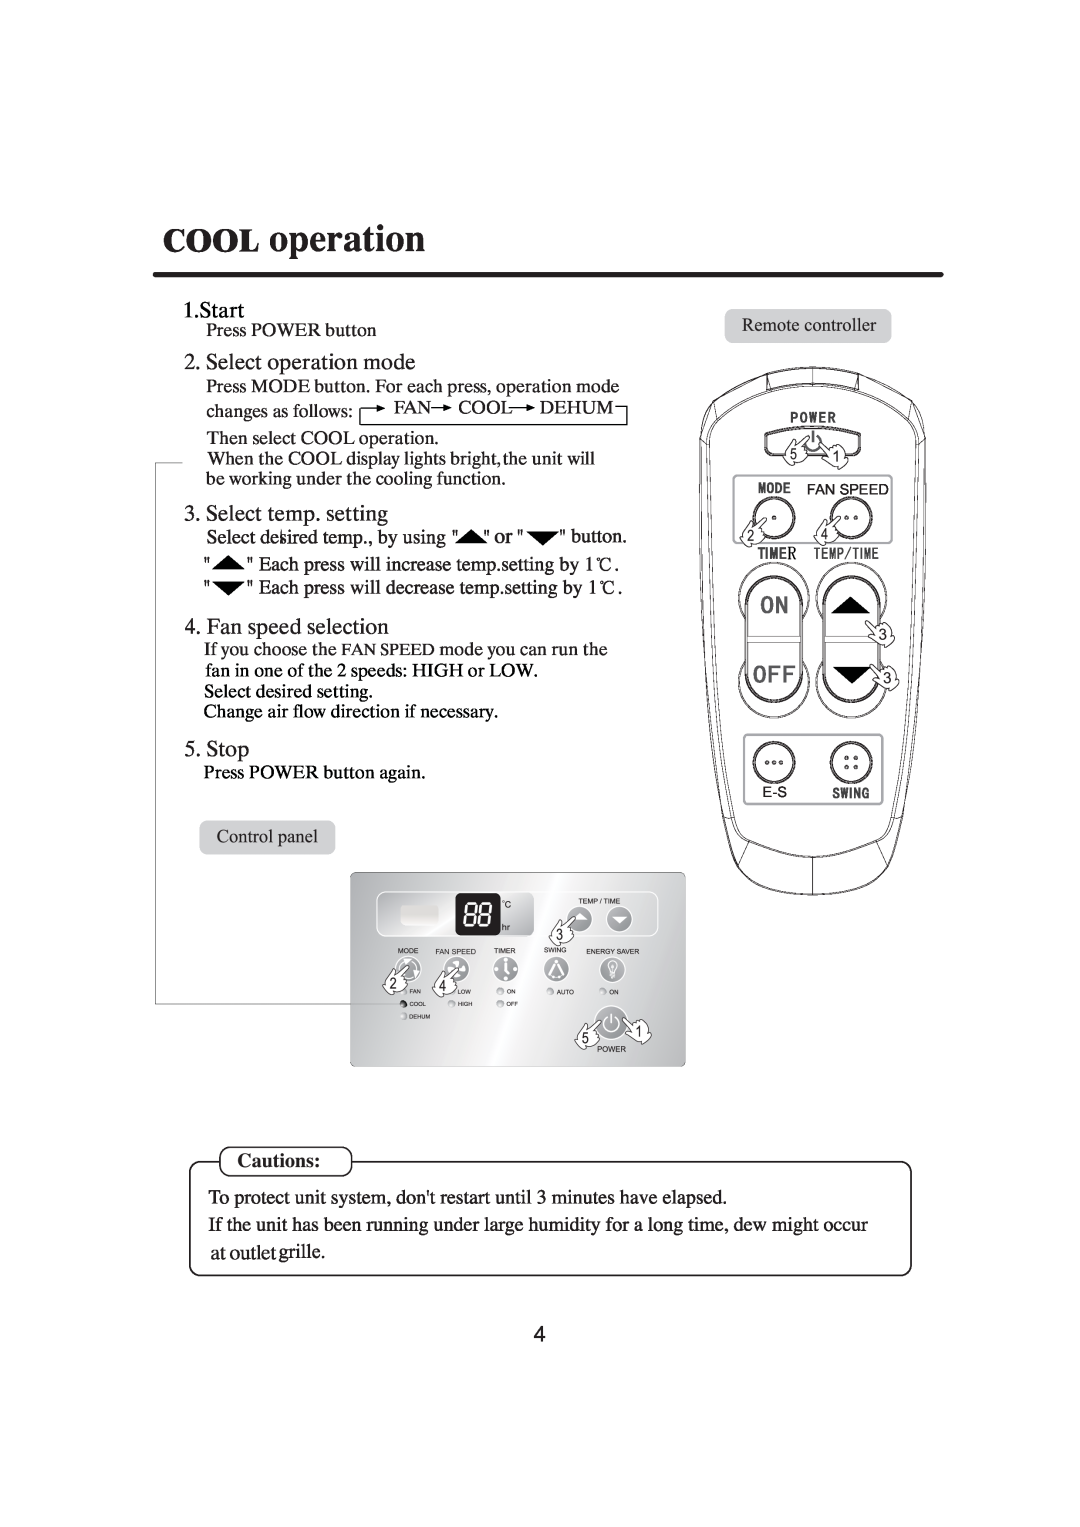 Haier 0010515690 Start, Select operation mode, Select temp. setting, Fan speed selection, Stop, Press POWER button again 